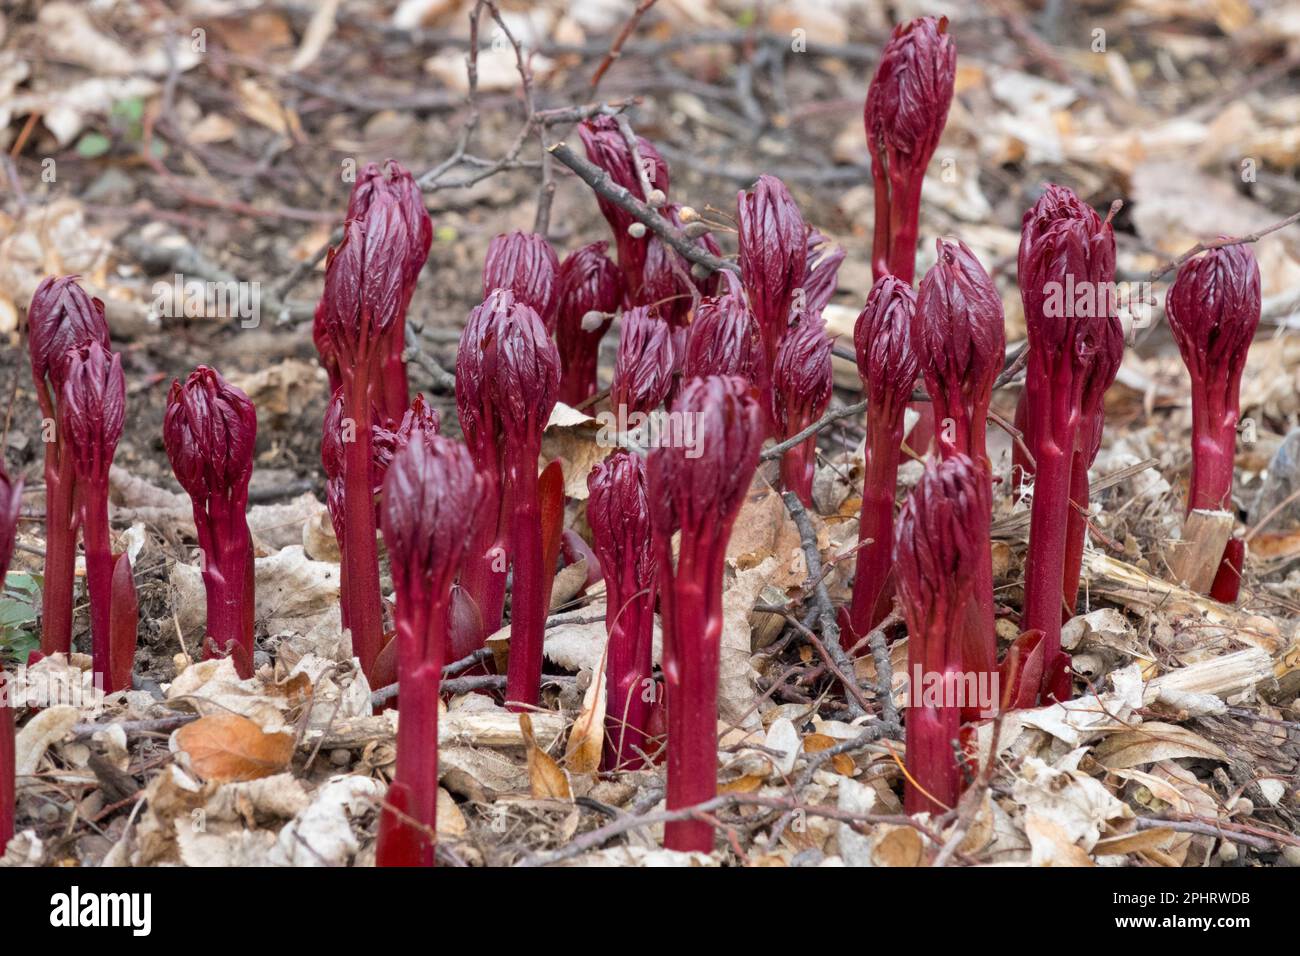 Red Shoots Peonies March Budding Sprouts Growing Peony Herbaceous Plant shoots Spring Garden Paeonia Plants Early spring Buds Peony shoots Perennial Stock Photo